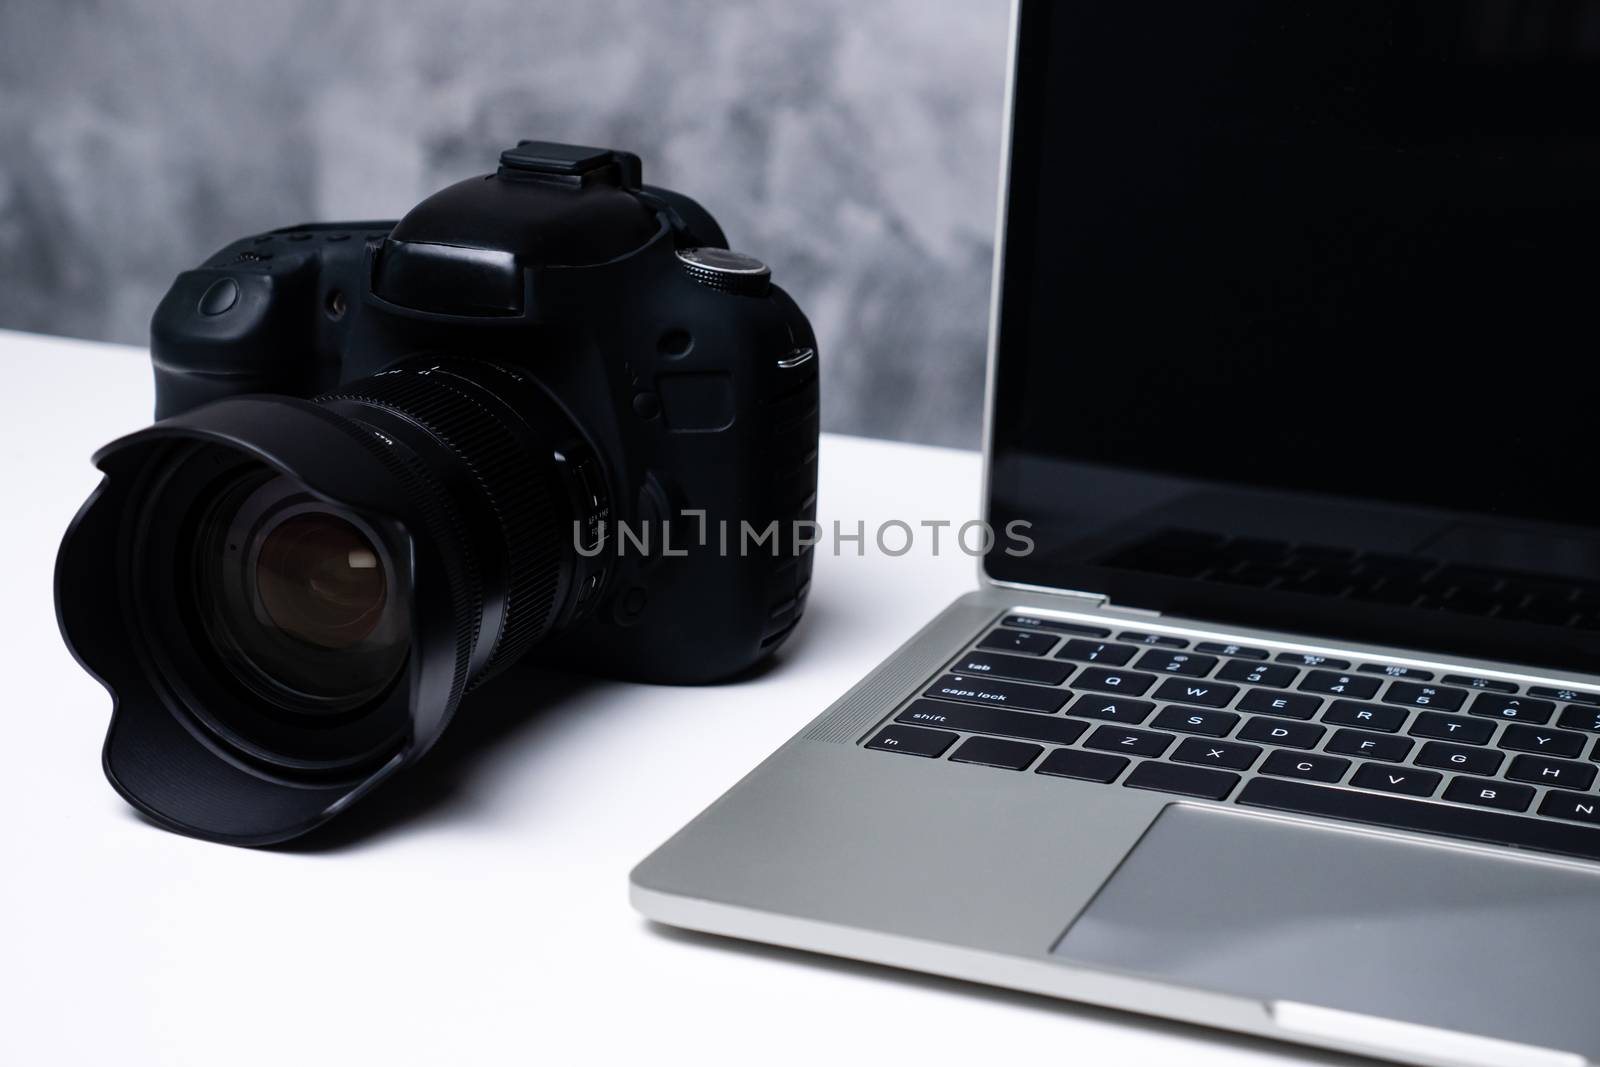 A black digital camera and a computer laptop on a table.